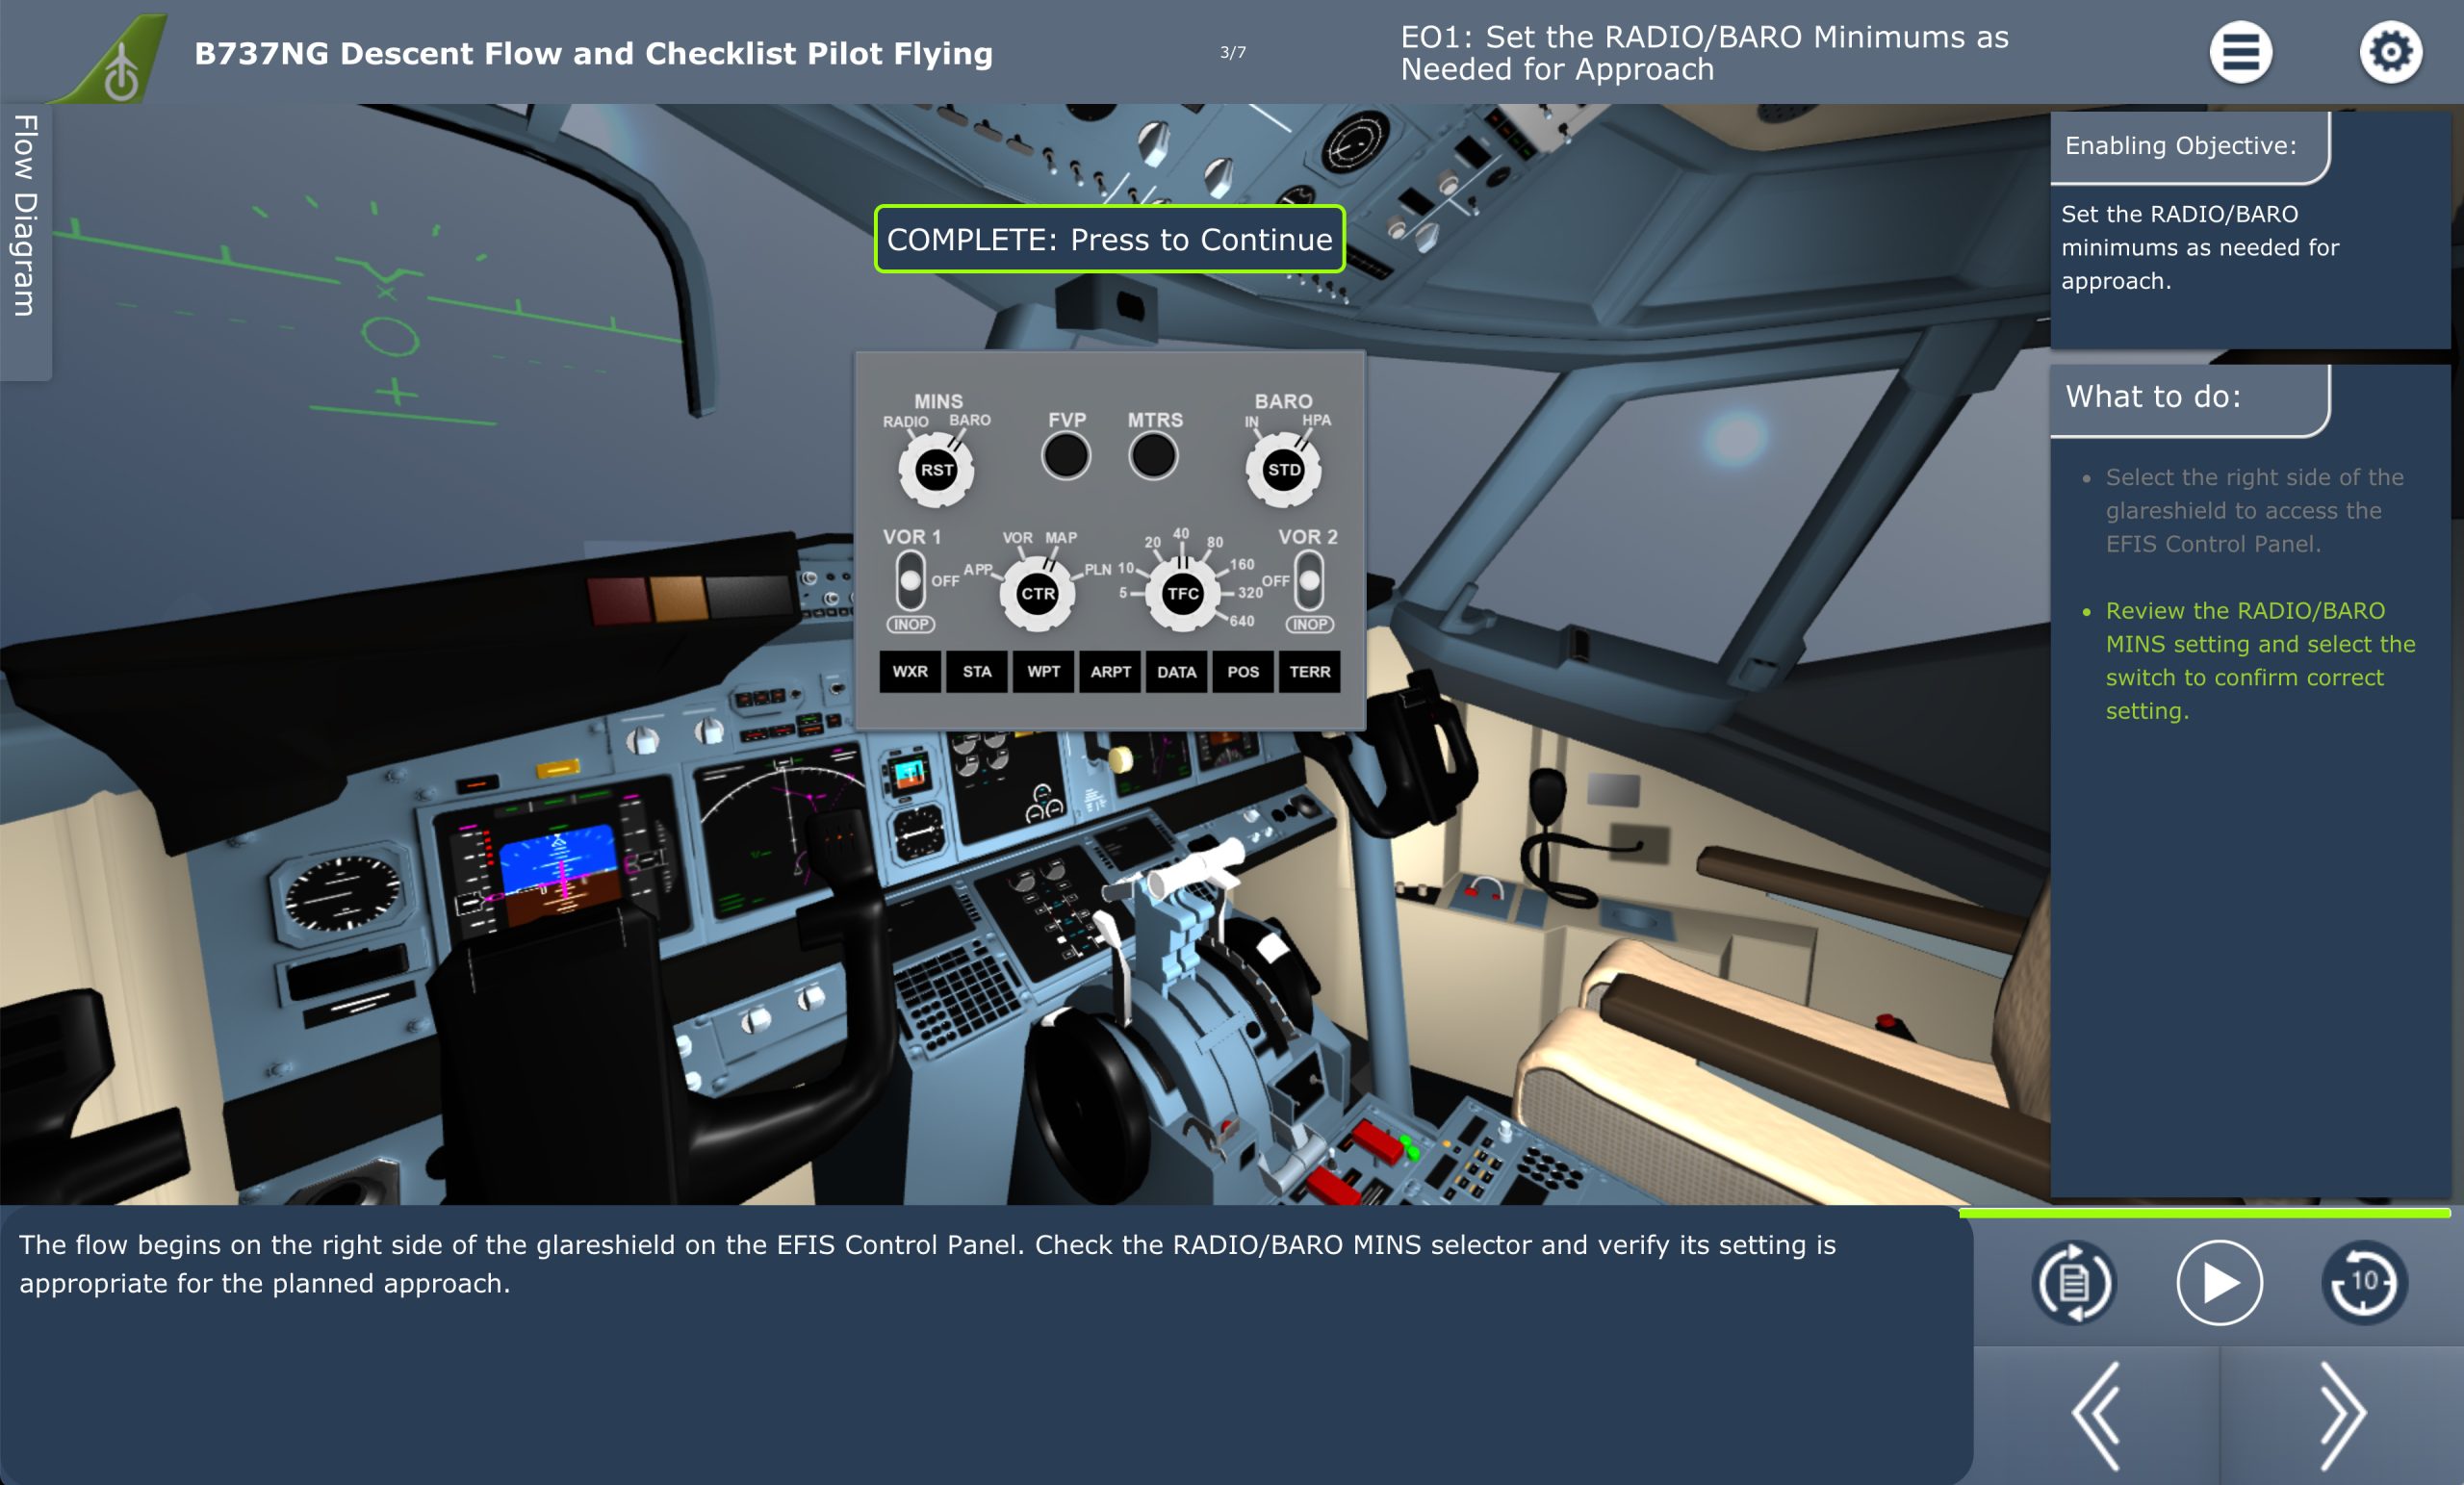 CPaT Invent Boeing B737NG 3D Cockpit